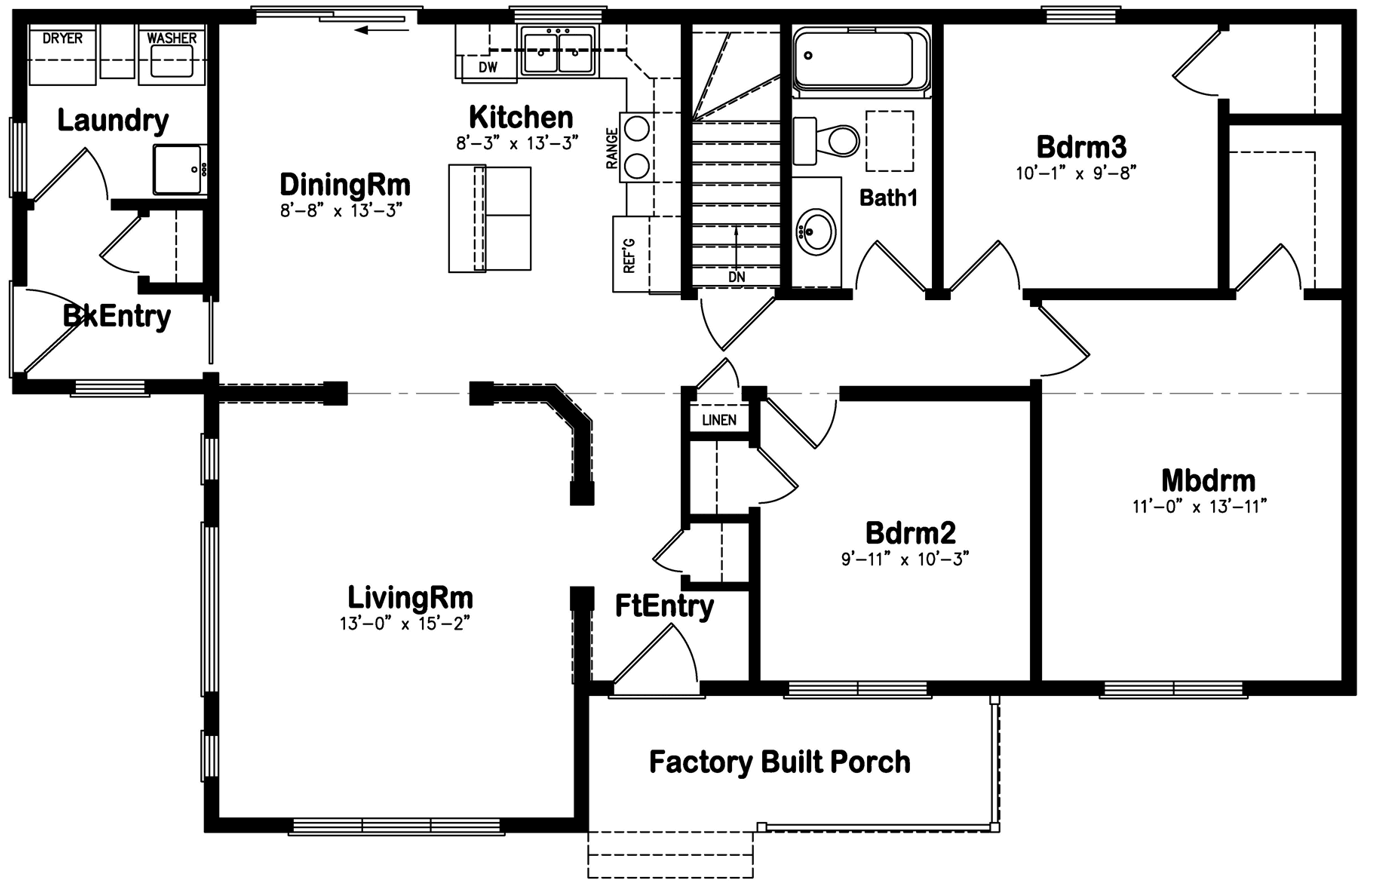  1200 Sq Ft Ranch House Plans  With Basement Picture of 